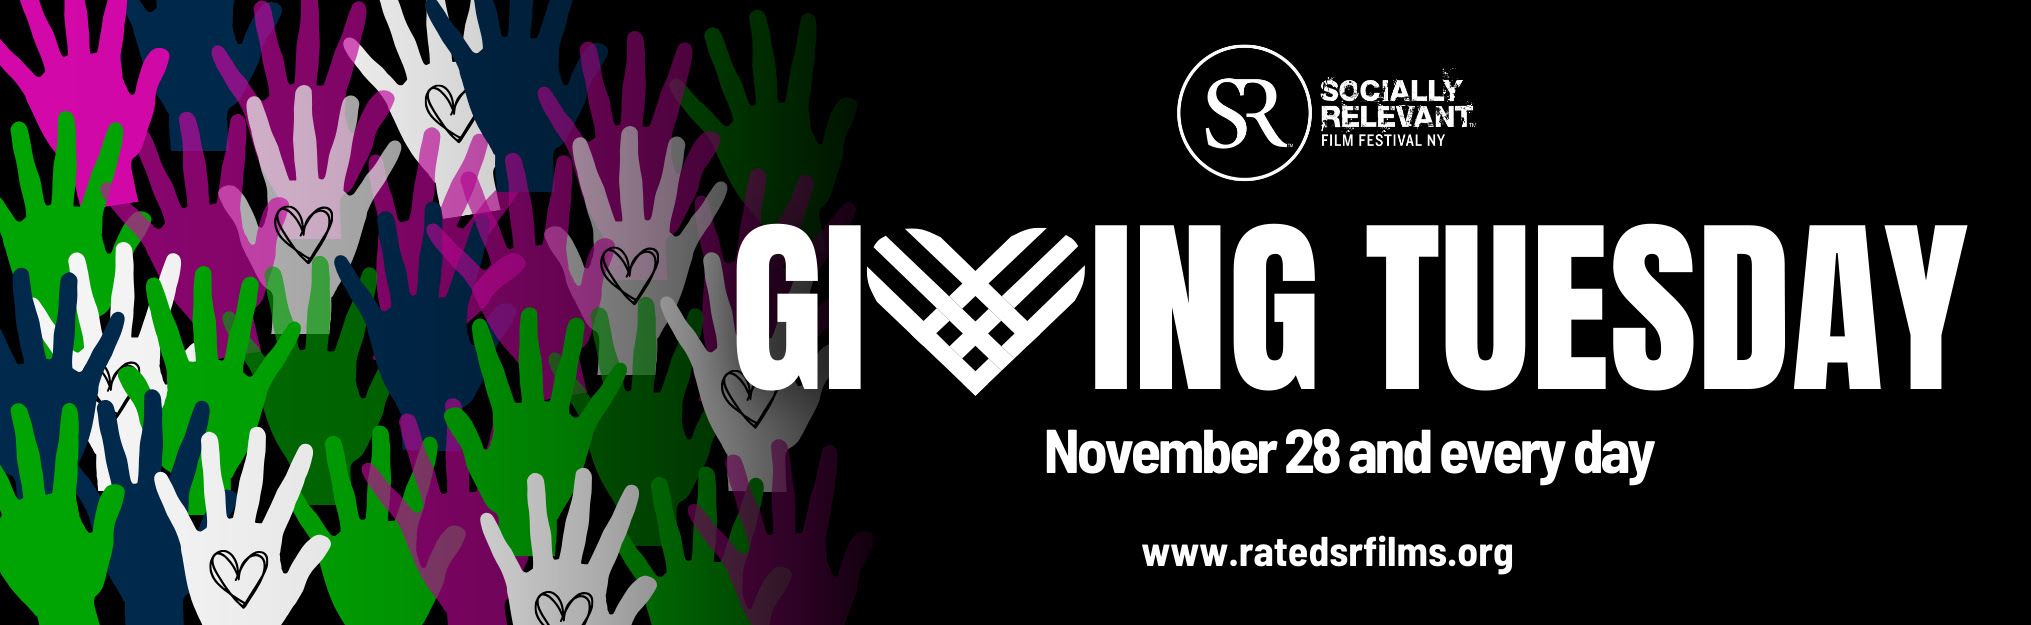 Email Header_Giving Tuesday 2